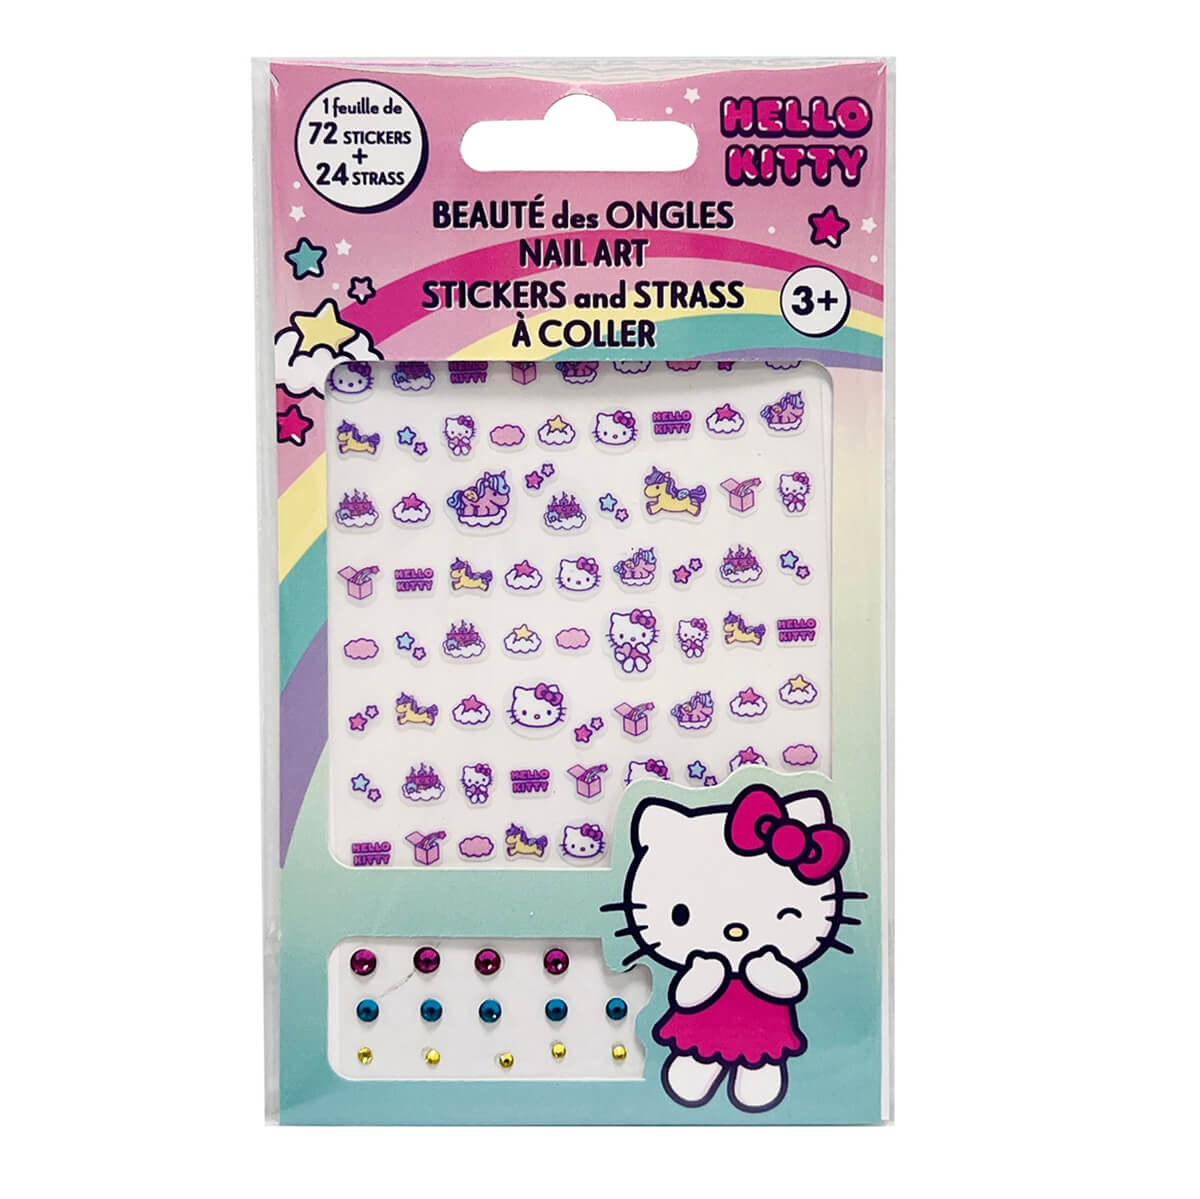 Hello Kitty Nail Art Stickers and Rhinestones by Take Care – Junior Edition